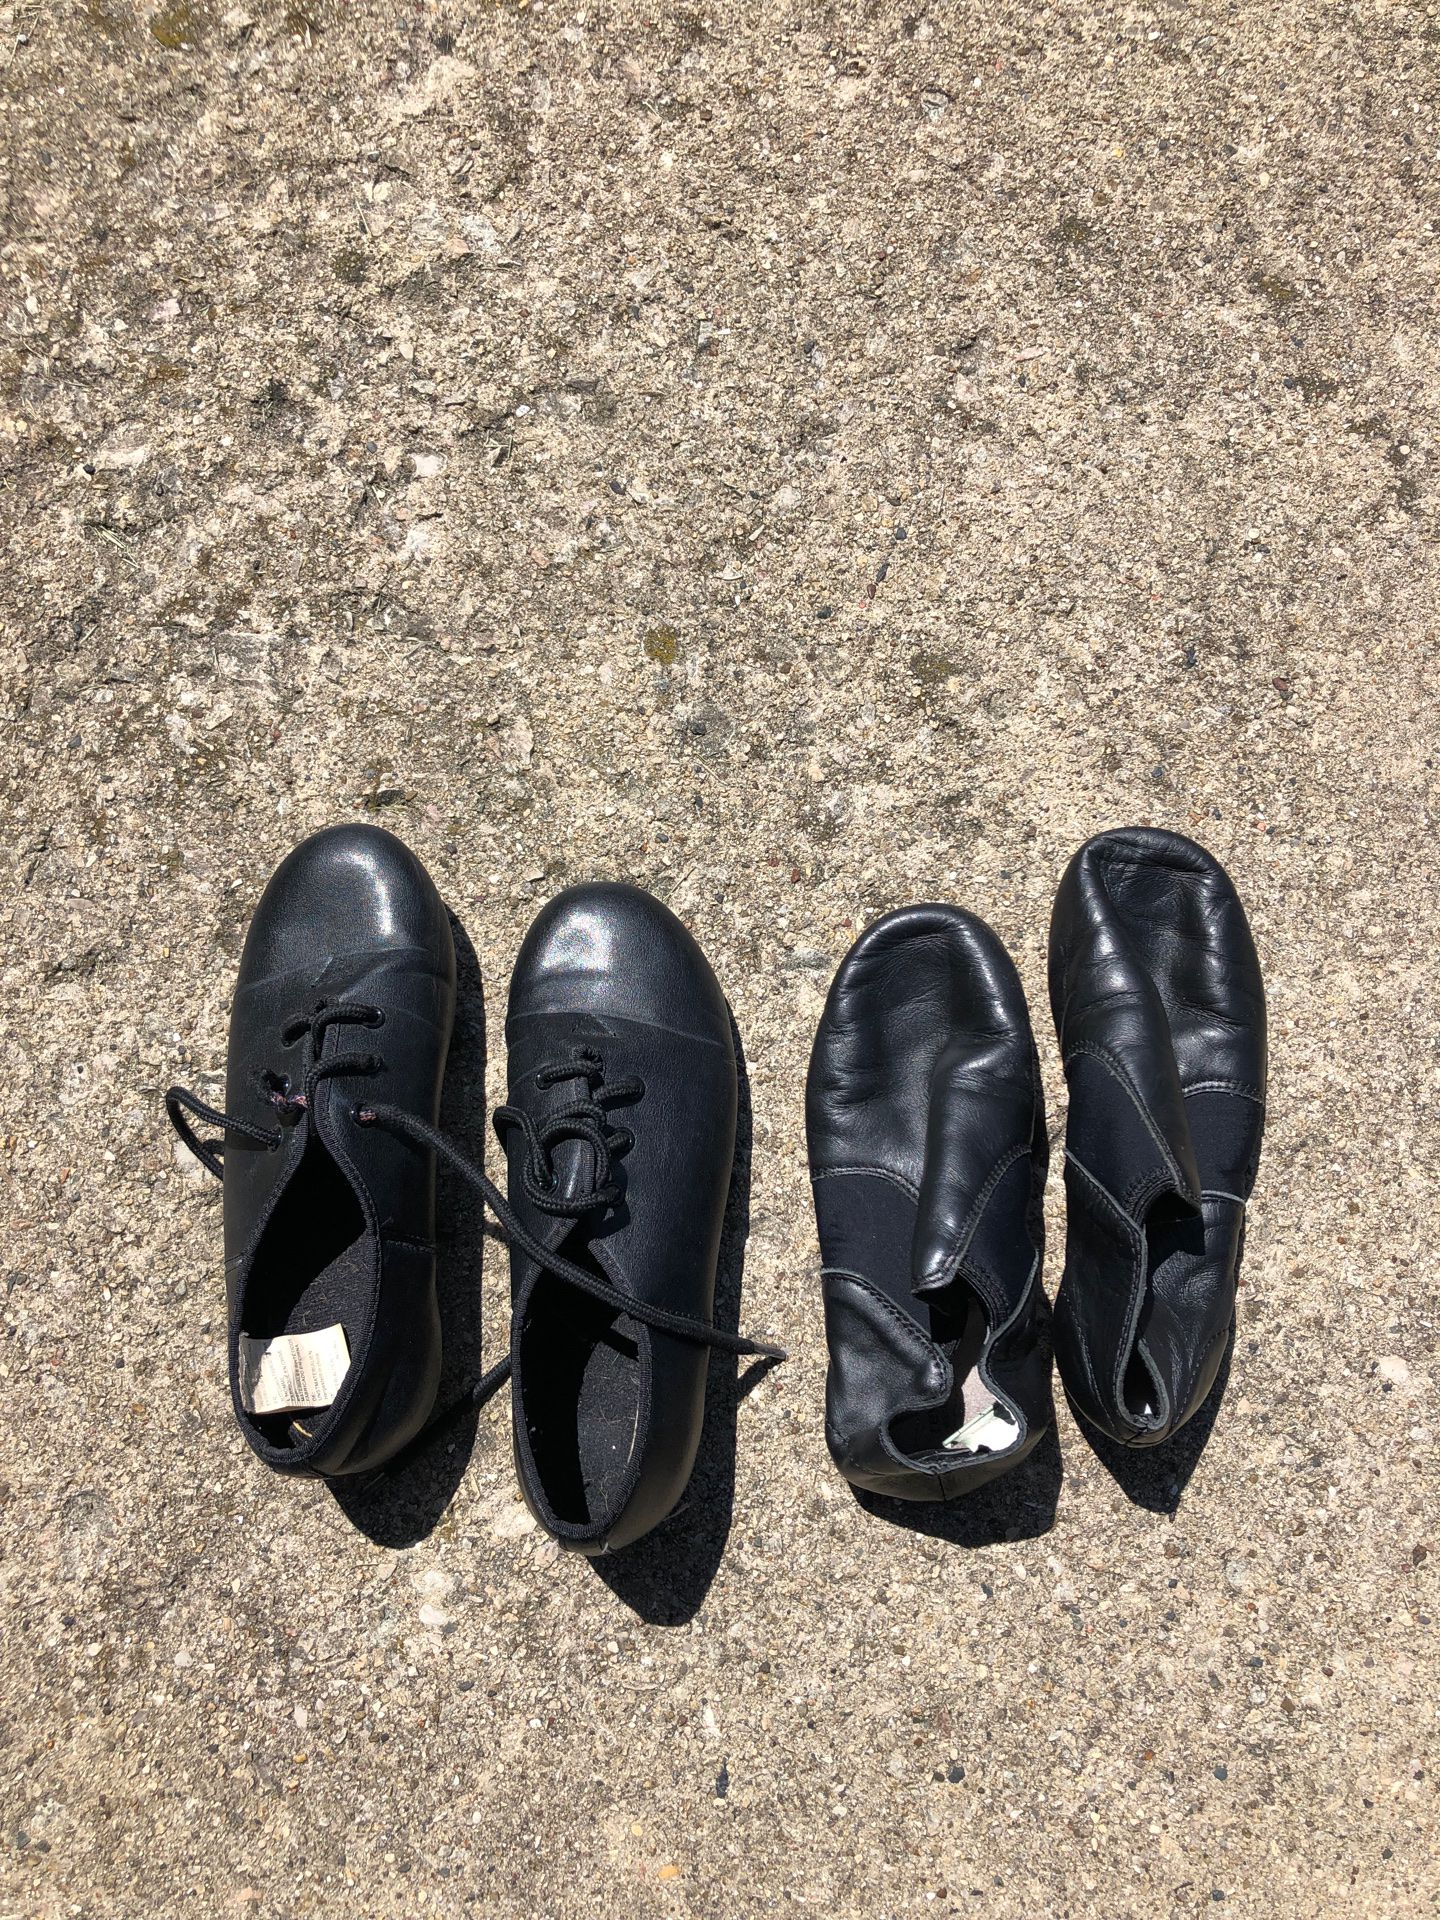 Tap and jazz shoes